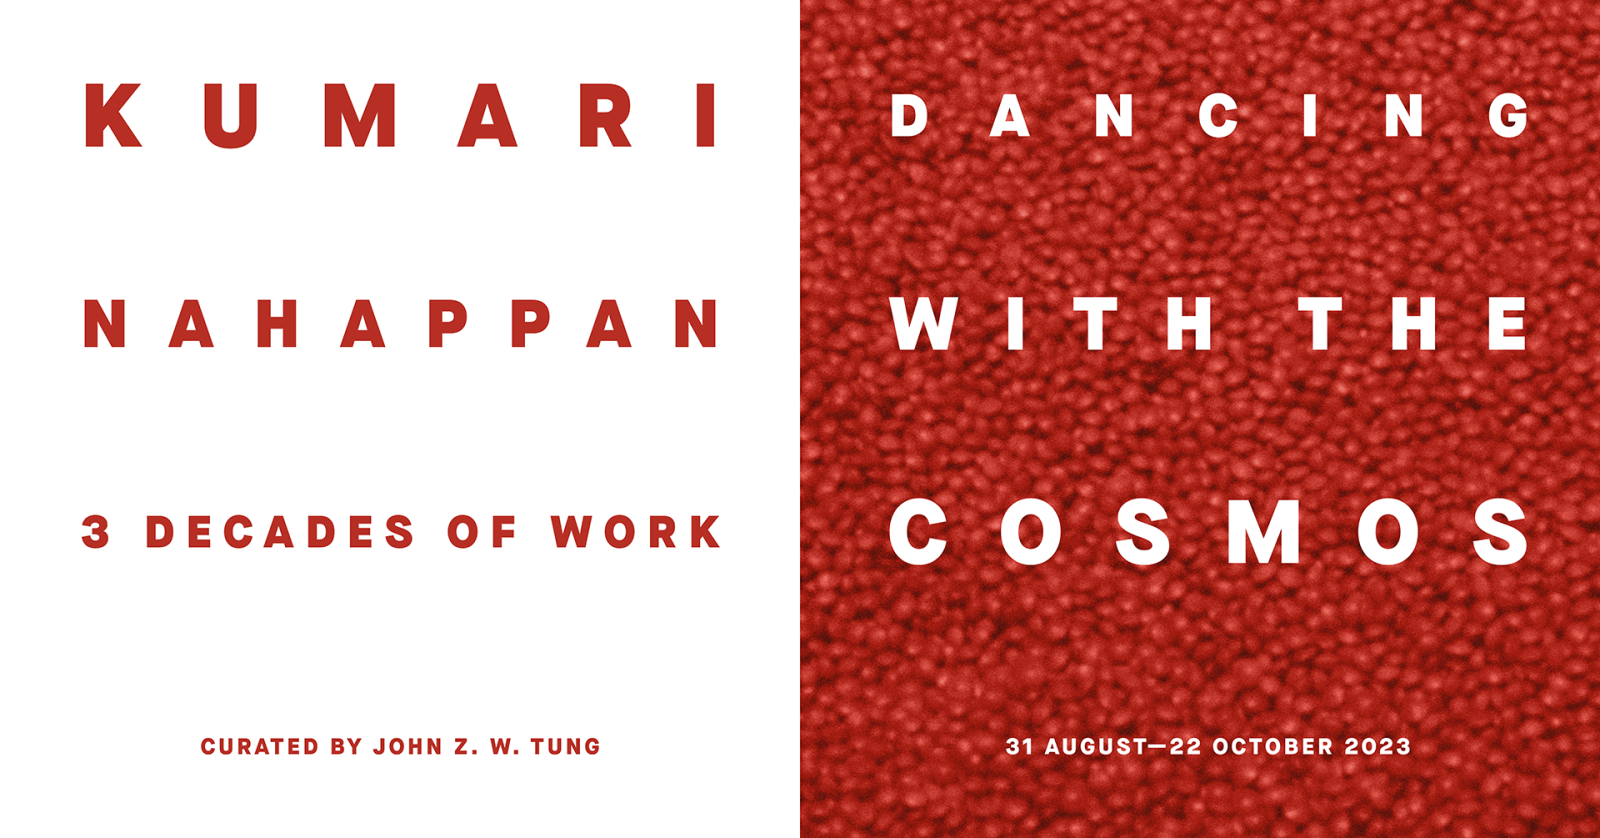 Visual with event details of Dancing with the Cosmos: Three Decades of Work from Kumari Nahappan